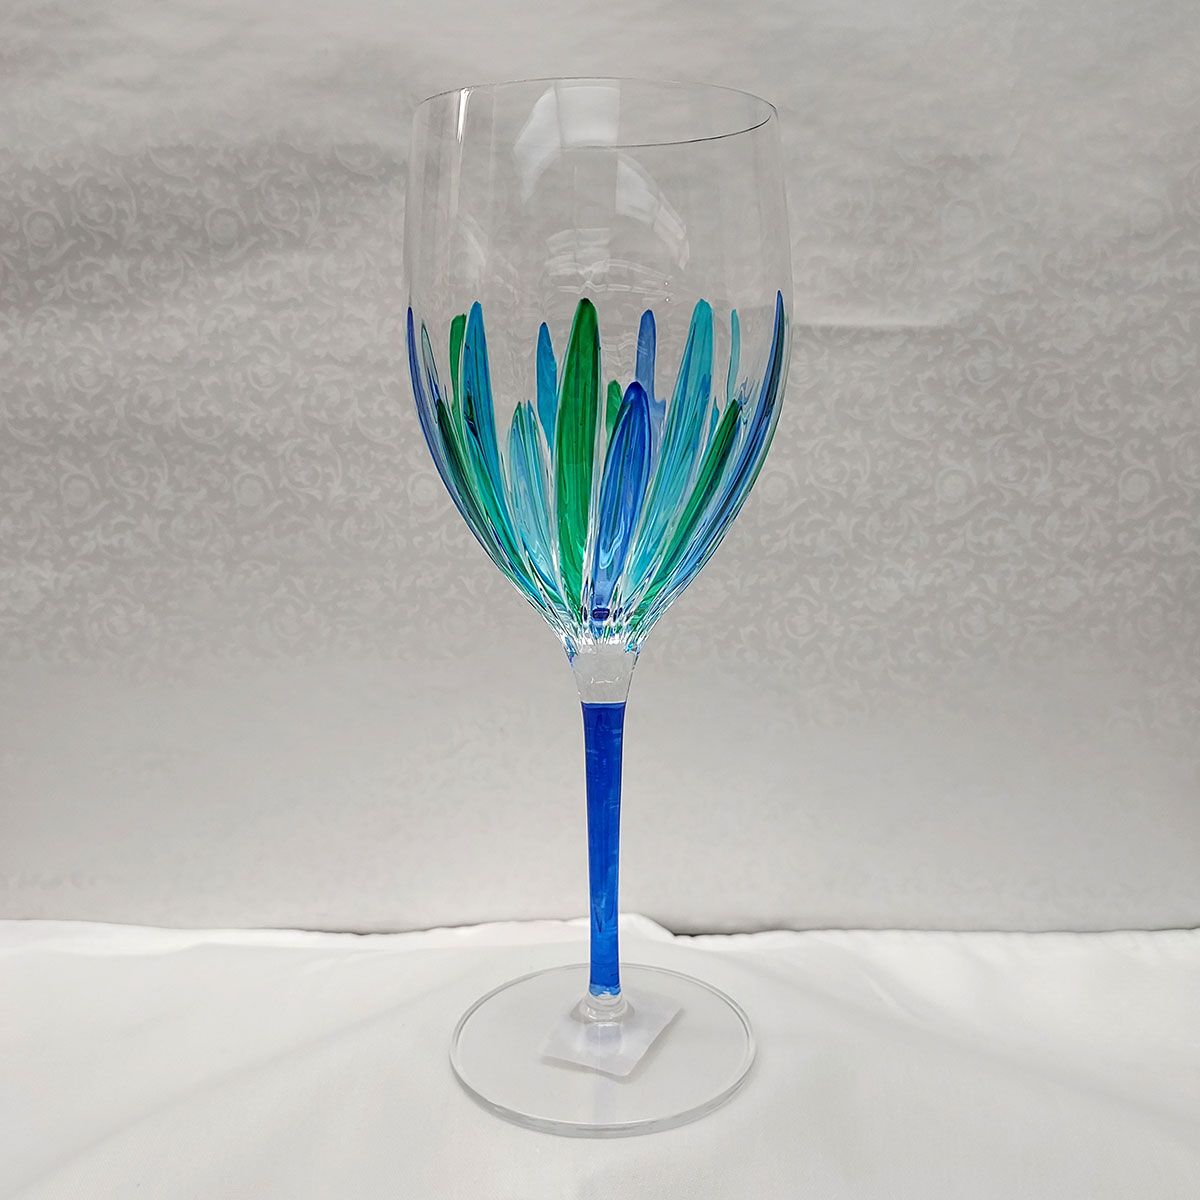 Timeless Champagne Glasses, Set of 2, Hand-Painted Italian Crystal